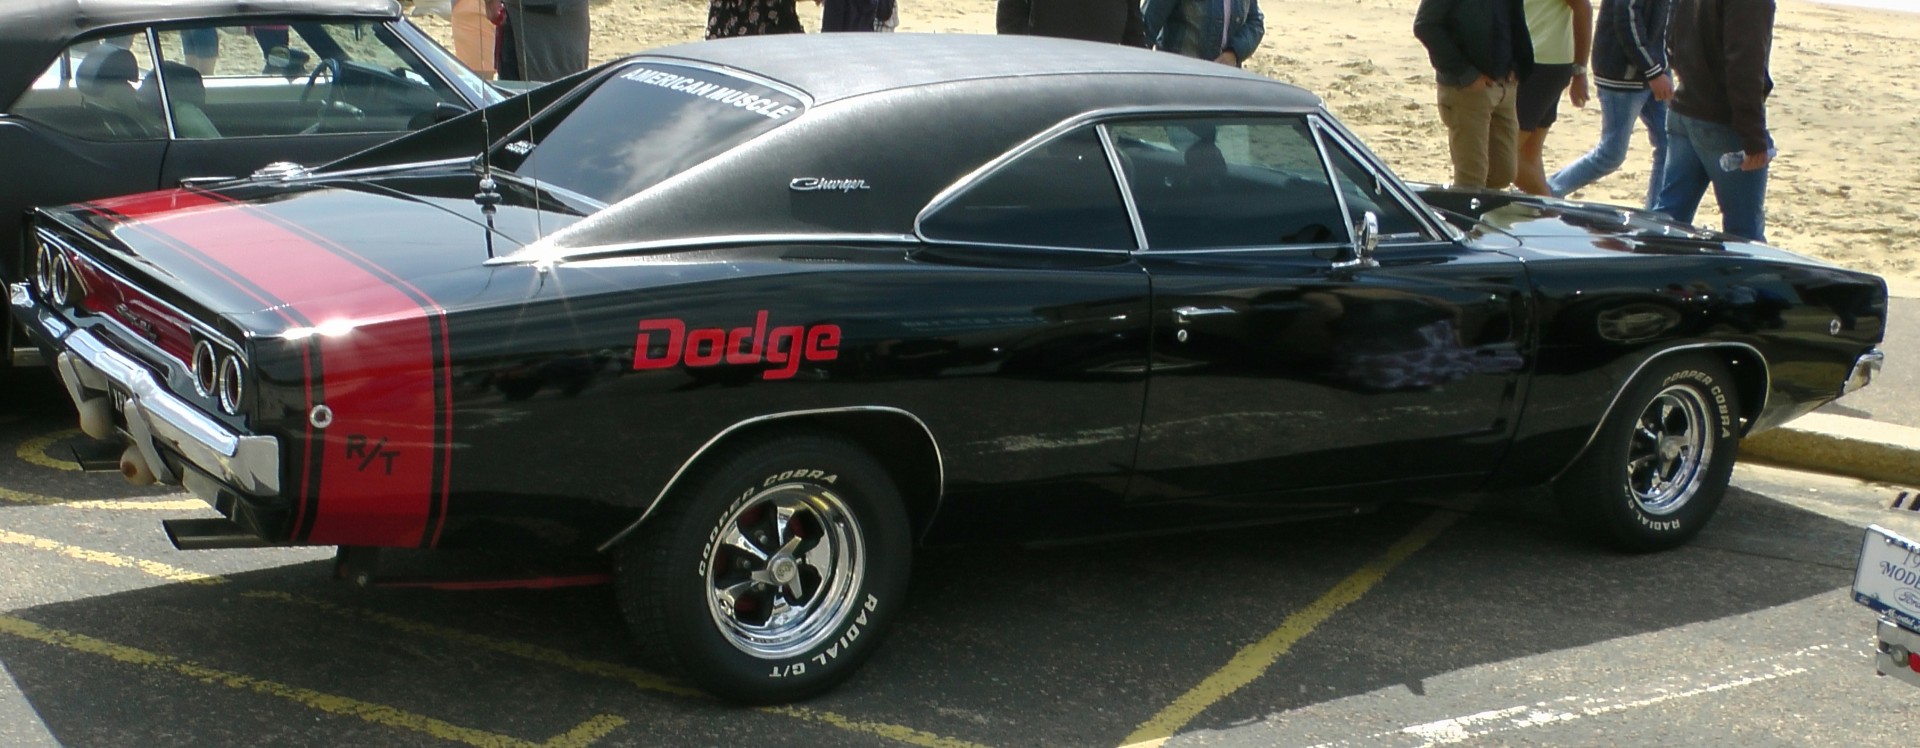 cars dodge charger car dodge charger free photo